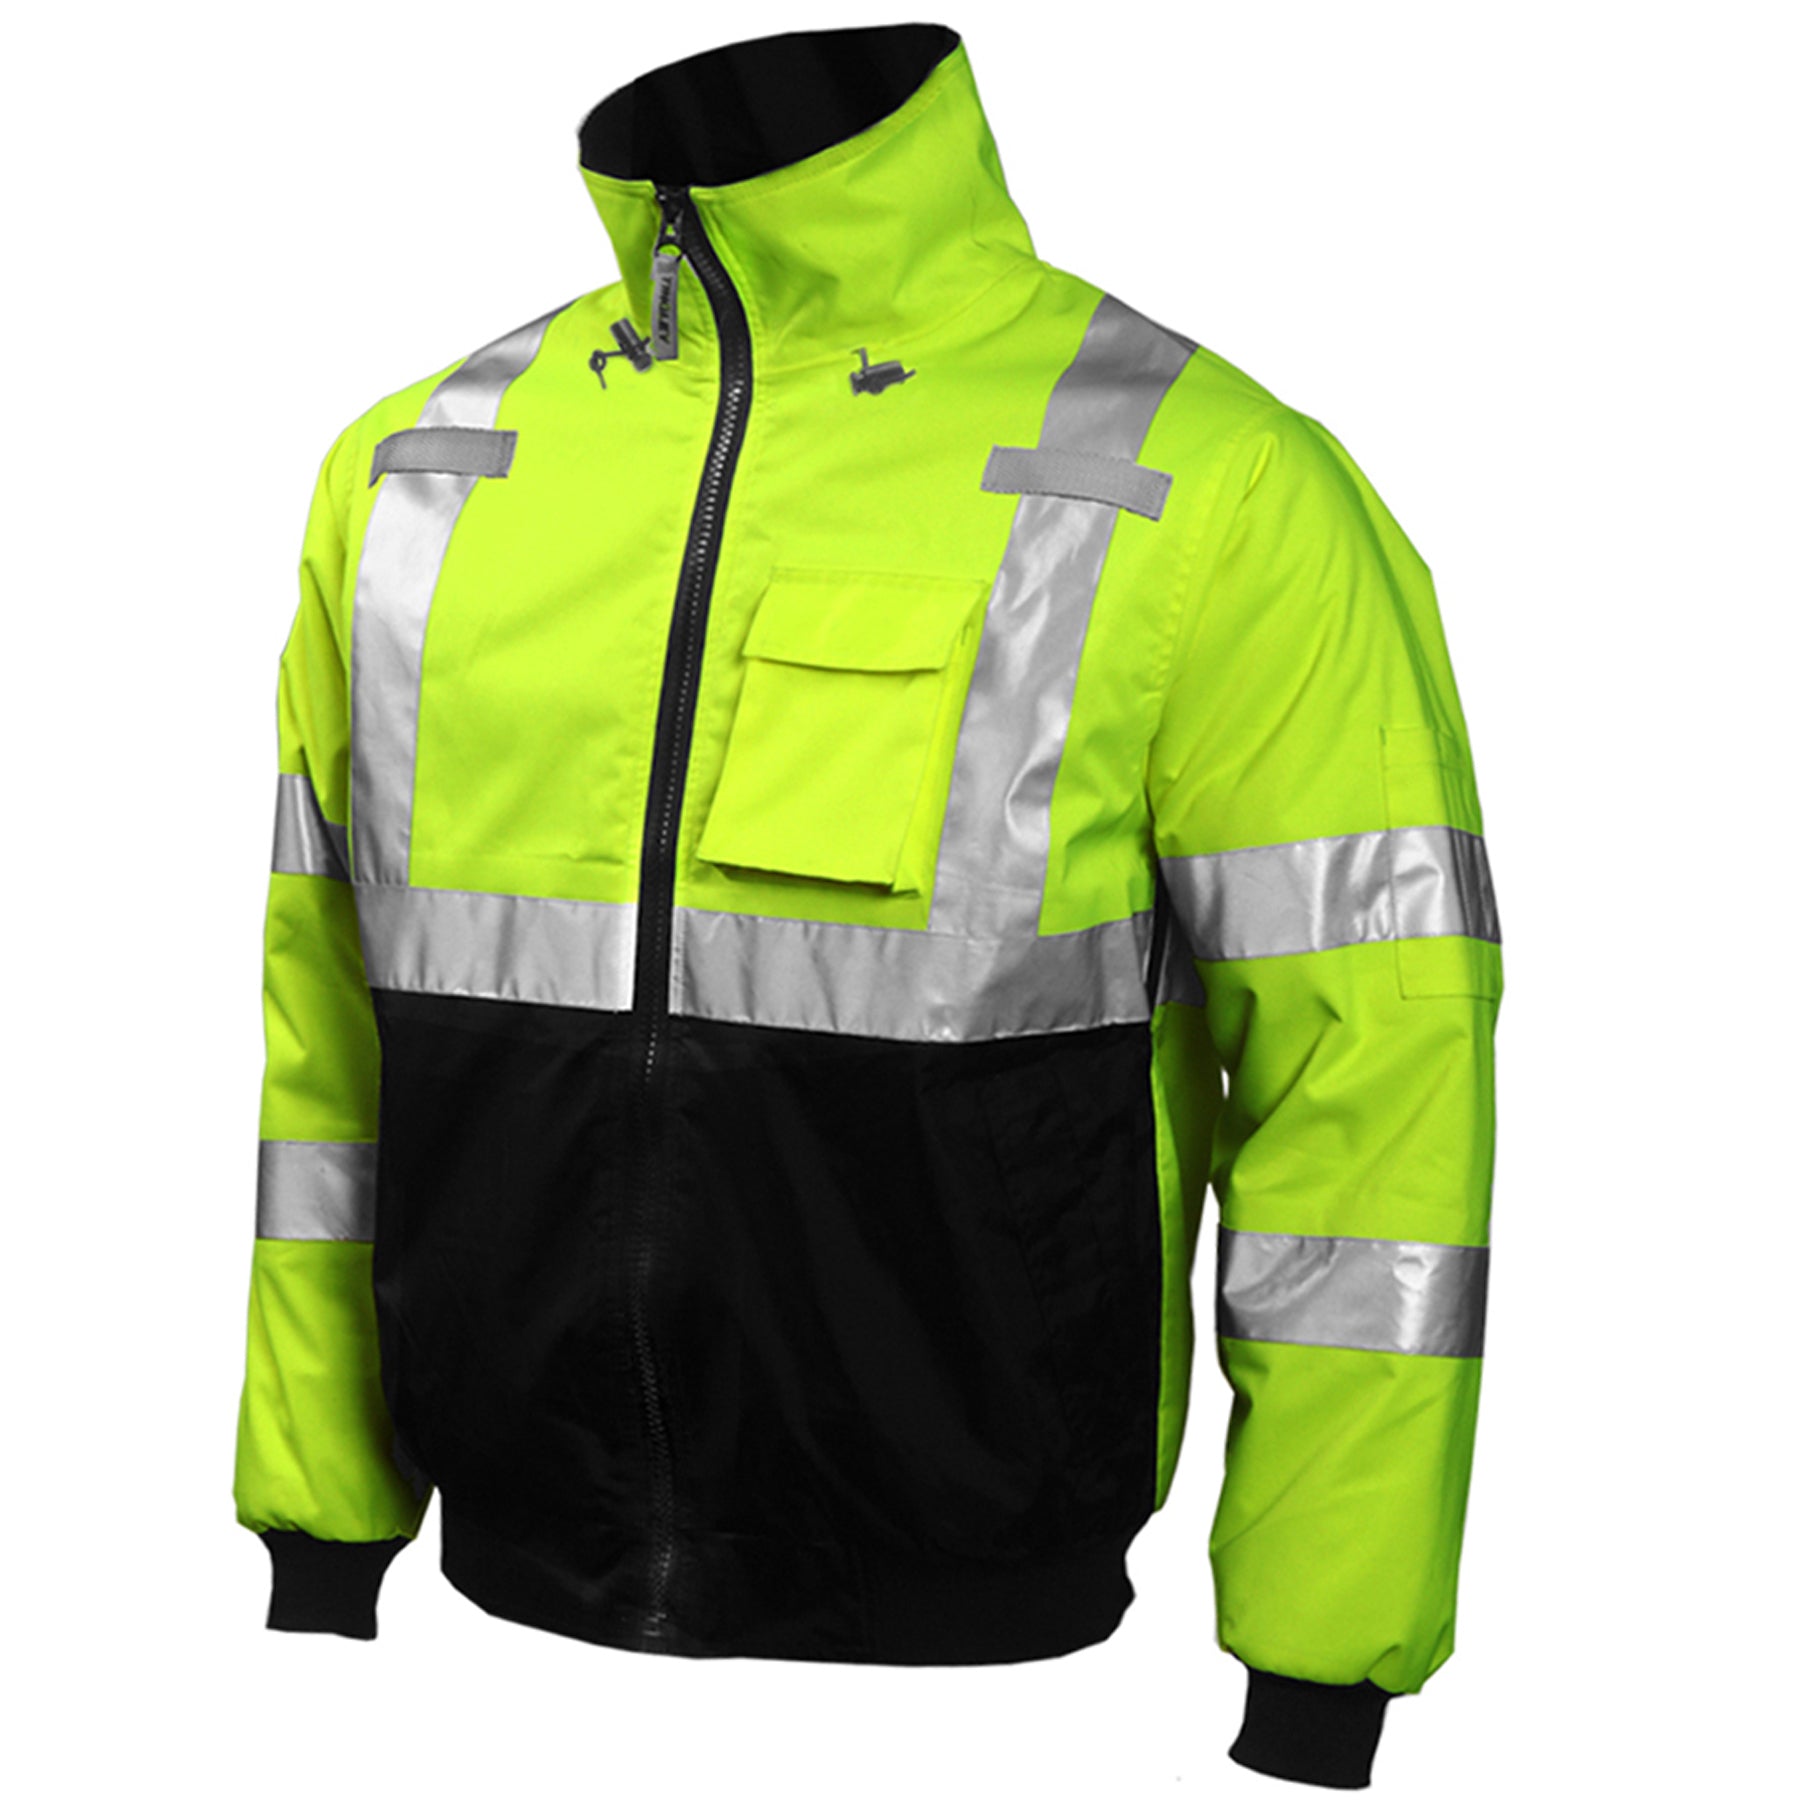 Bomber Jacket - Type R Class 3 - Fluorescent Yellow-Green-Black - Silver Reflective Tape - Insulated Fleece Liner - Attached Hood-eSafety Supplies, Inc